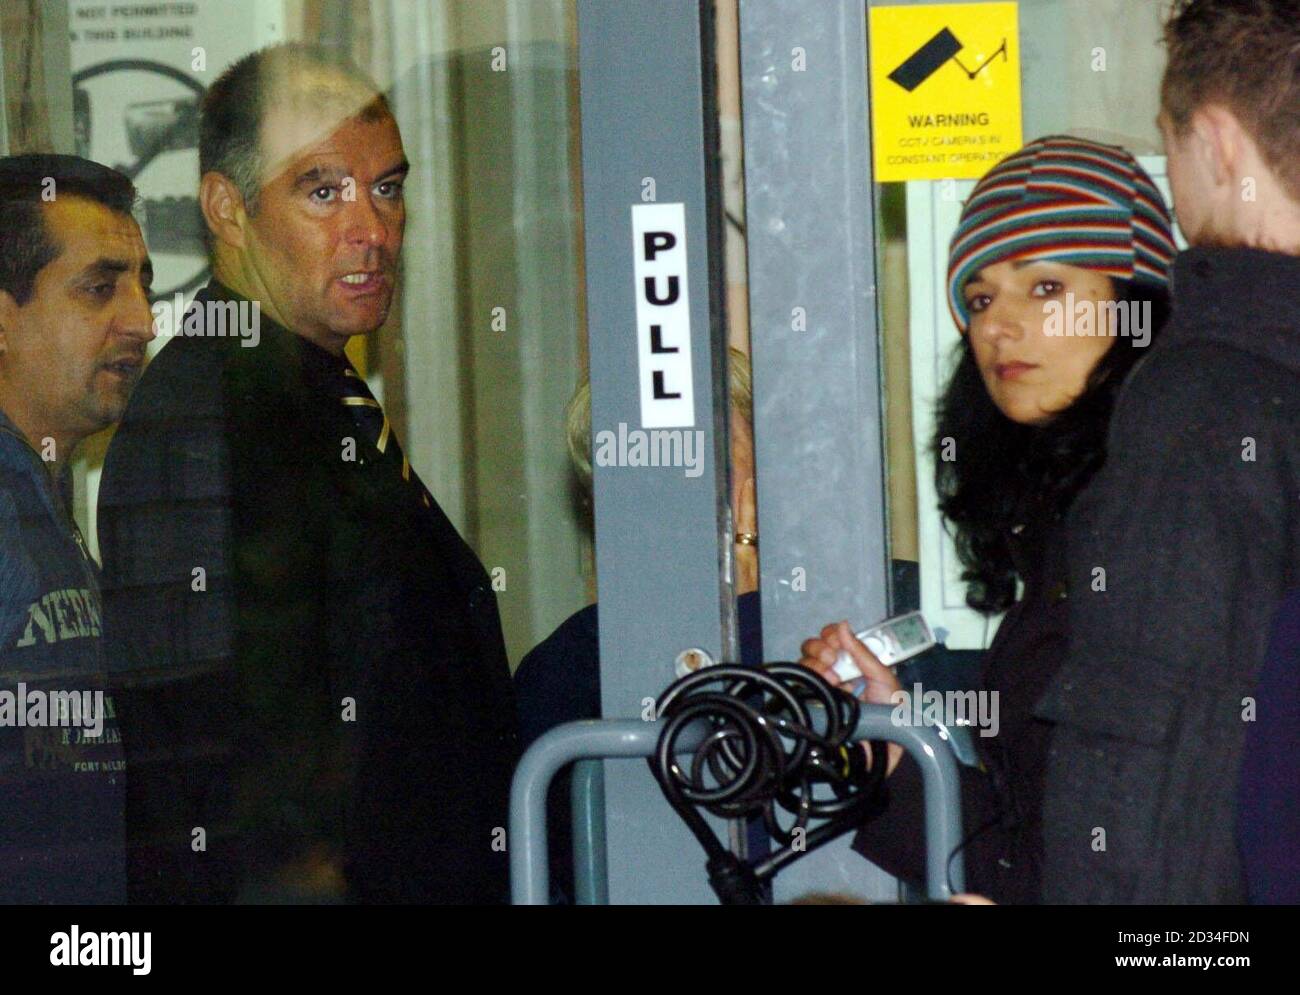 Scottish Socialist Tommy Sheridan and Nationalist stages a pro-asylum protest inside an Immigration Office in Brand Street, Glasgow, Wednesday, November 2, 2005. Pic shows Tommy chatting to director of Positive Action Housing Robina Qureshi through the padlocked doors of the office. Robina said the protest was to highlight the "inhumanities perpetrated" by the Home Office See PA Story SCOTLAND Protest. PRESS ASSOCIATION PHOTO. PHOTO CREDIT SHOULD READ Danny Lawson/PA Stock Photo